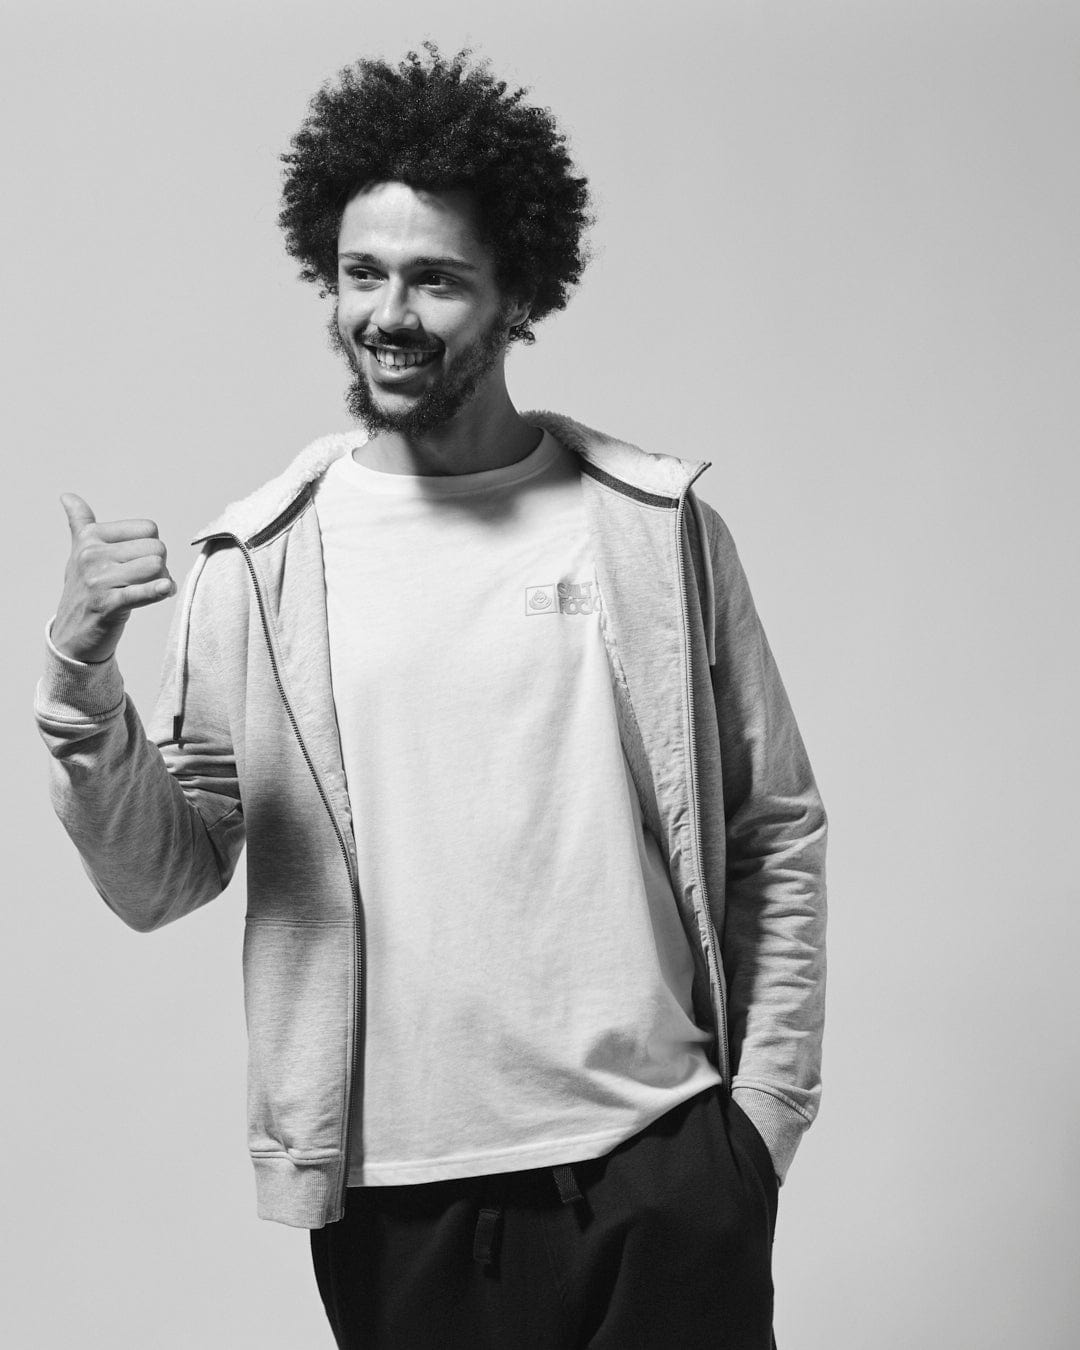 A man with an afro hairstyle, smiling and giving a thumbs-up gesture to the camera, dressed in a casual hooded jacket featuring Saltrock branding over a Saltrock Original - Mens Short Sleeve T-Shirt - Dark Grey made of soft, lightweight material.